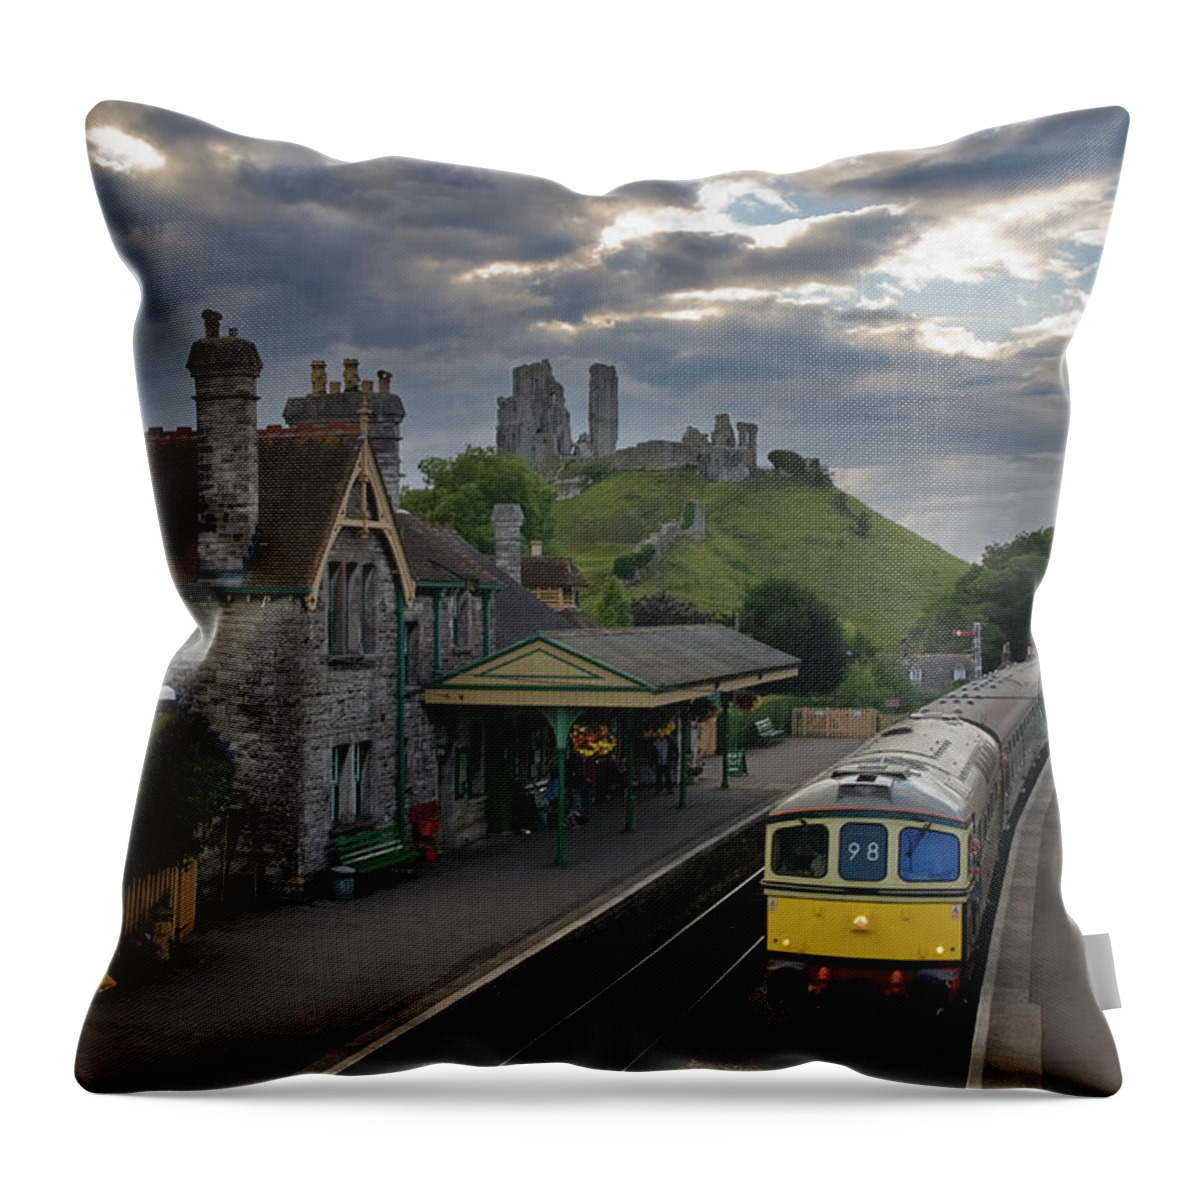 Dorset Throw Pillow featuring the photograph Corfe Castle Station by Laurence Cartwright Photography